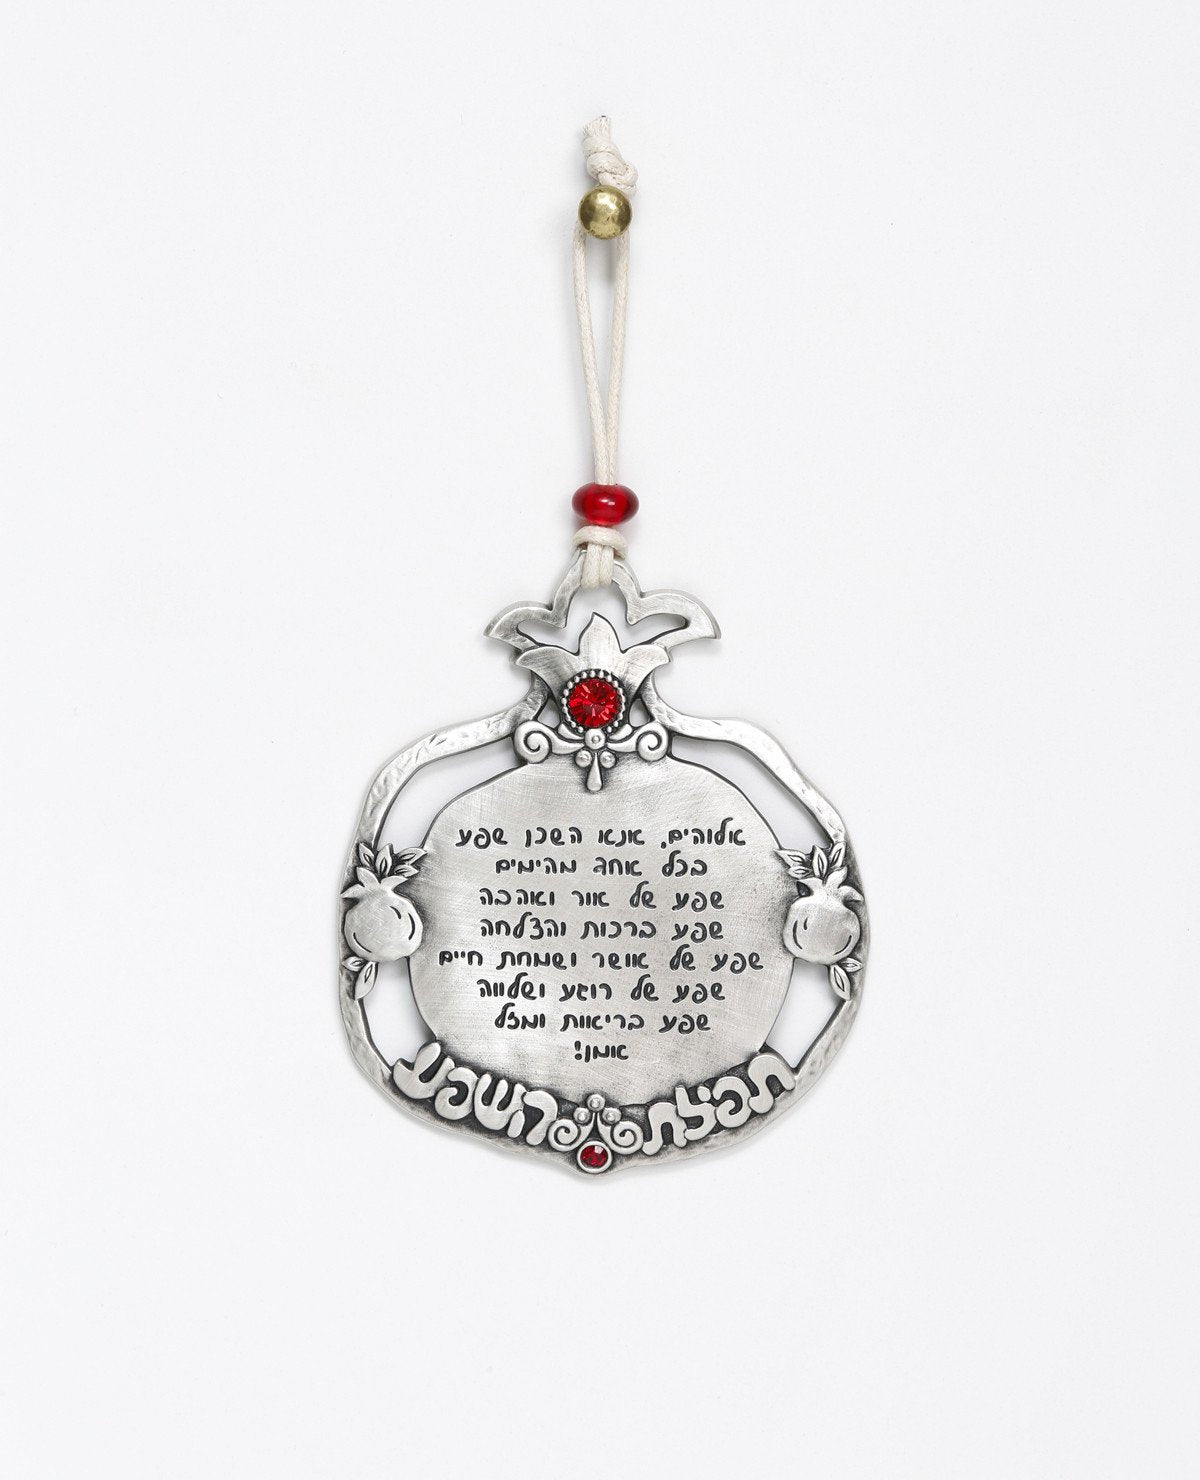 A beautiful and enlightening pomegranate hanging ornament that is all a blessing for abundance. An abundance of light and love, success, happiness and joy, peace and serenity, health and luck. The pomegranate is coated in sterling silver and designed as a plate surrounded by a hollow frame which is decorated by two small pomegranates and the words "Prayer of Abundance" appearing in the center. The prayer for abundance is engraved on the plate in the center of the pomegranate. The pomegranate has a double cr